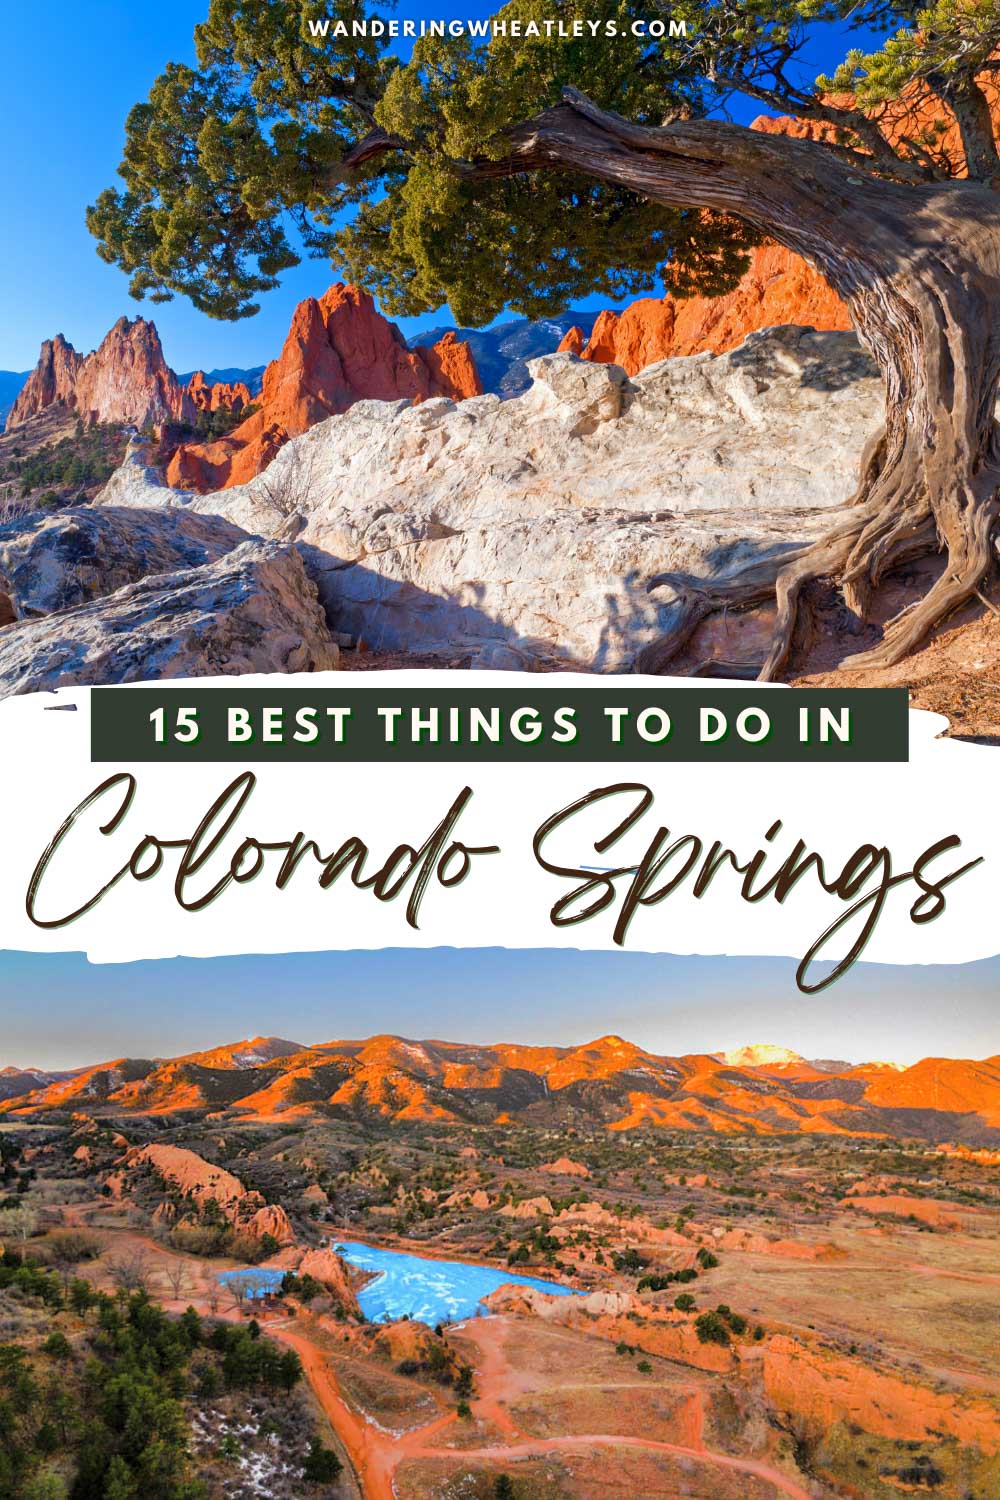 The Best Things to do in Colorado Springs